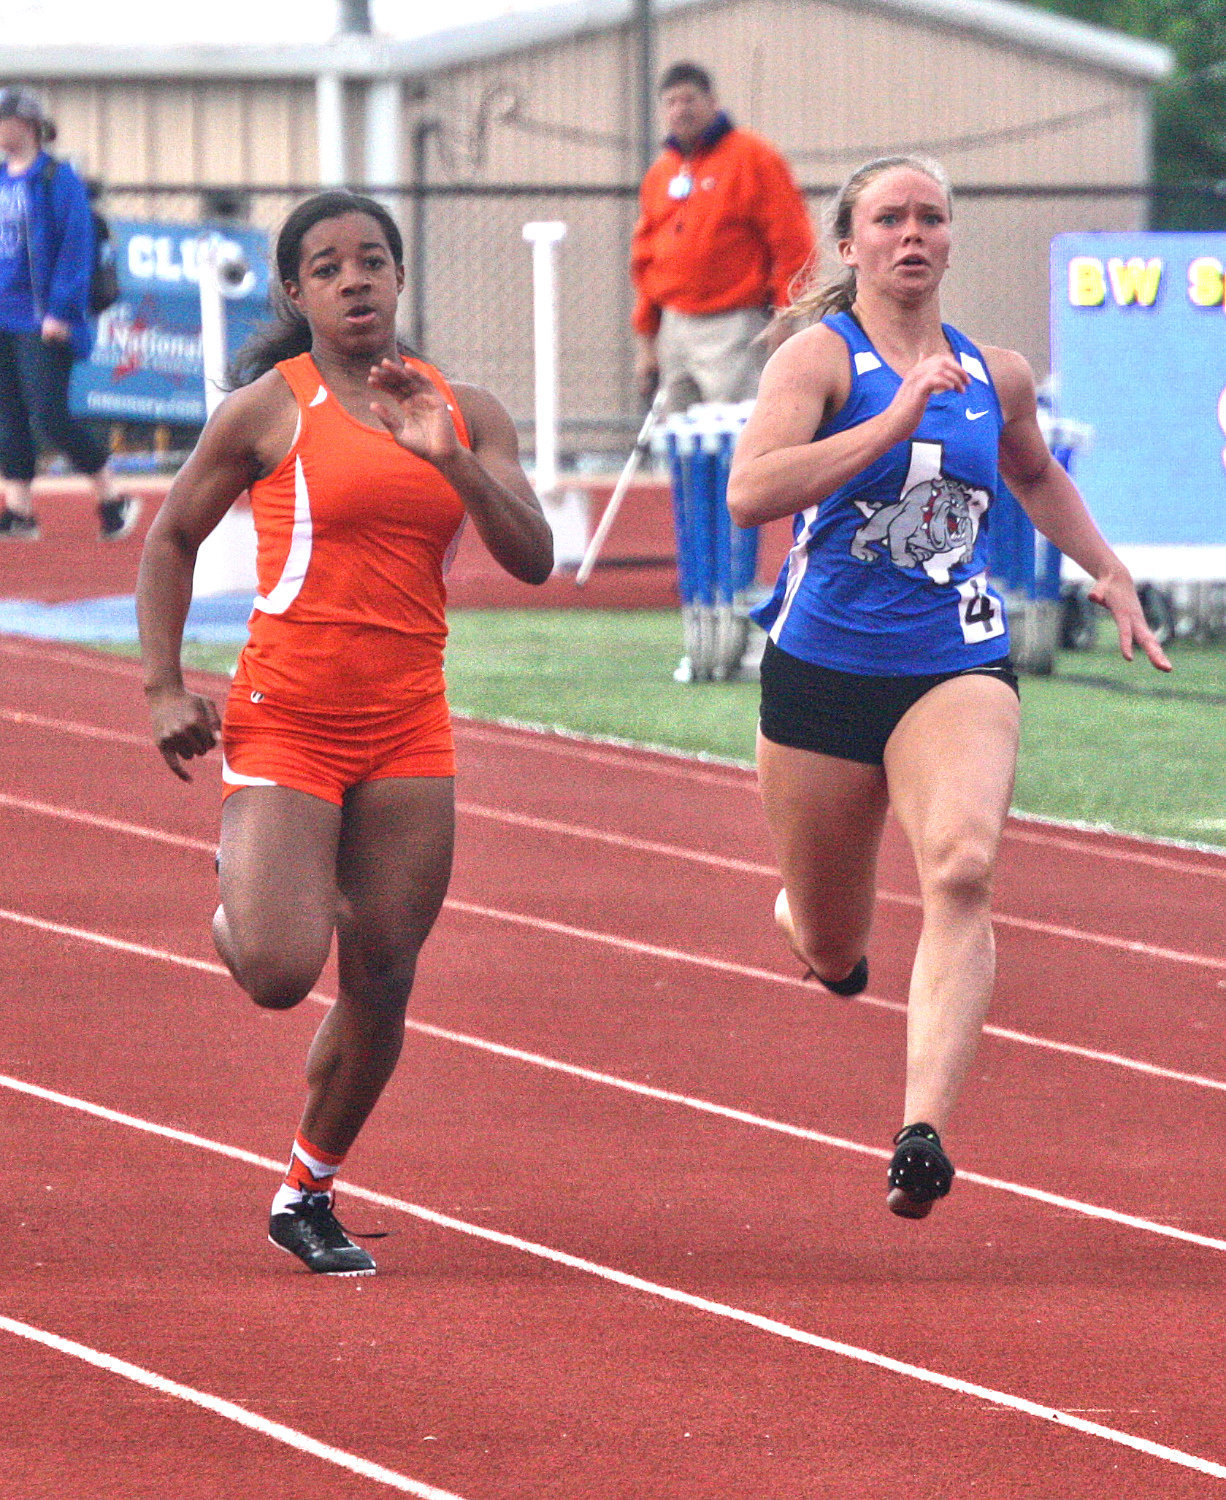 Mineola’s Abby Kratzmeyer nipped Quitman’s Madalyn Spears to take the gold in the 100 meter dash.